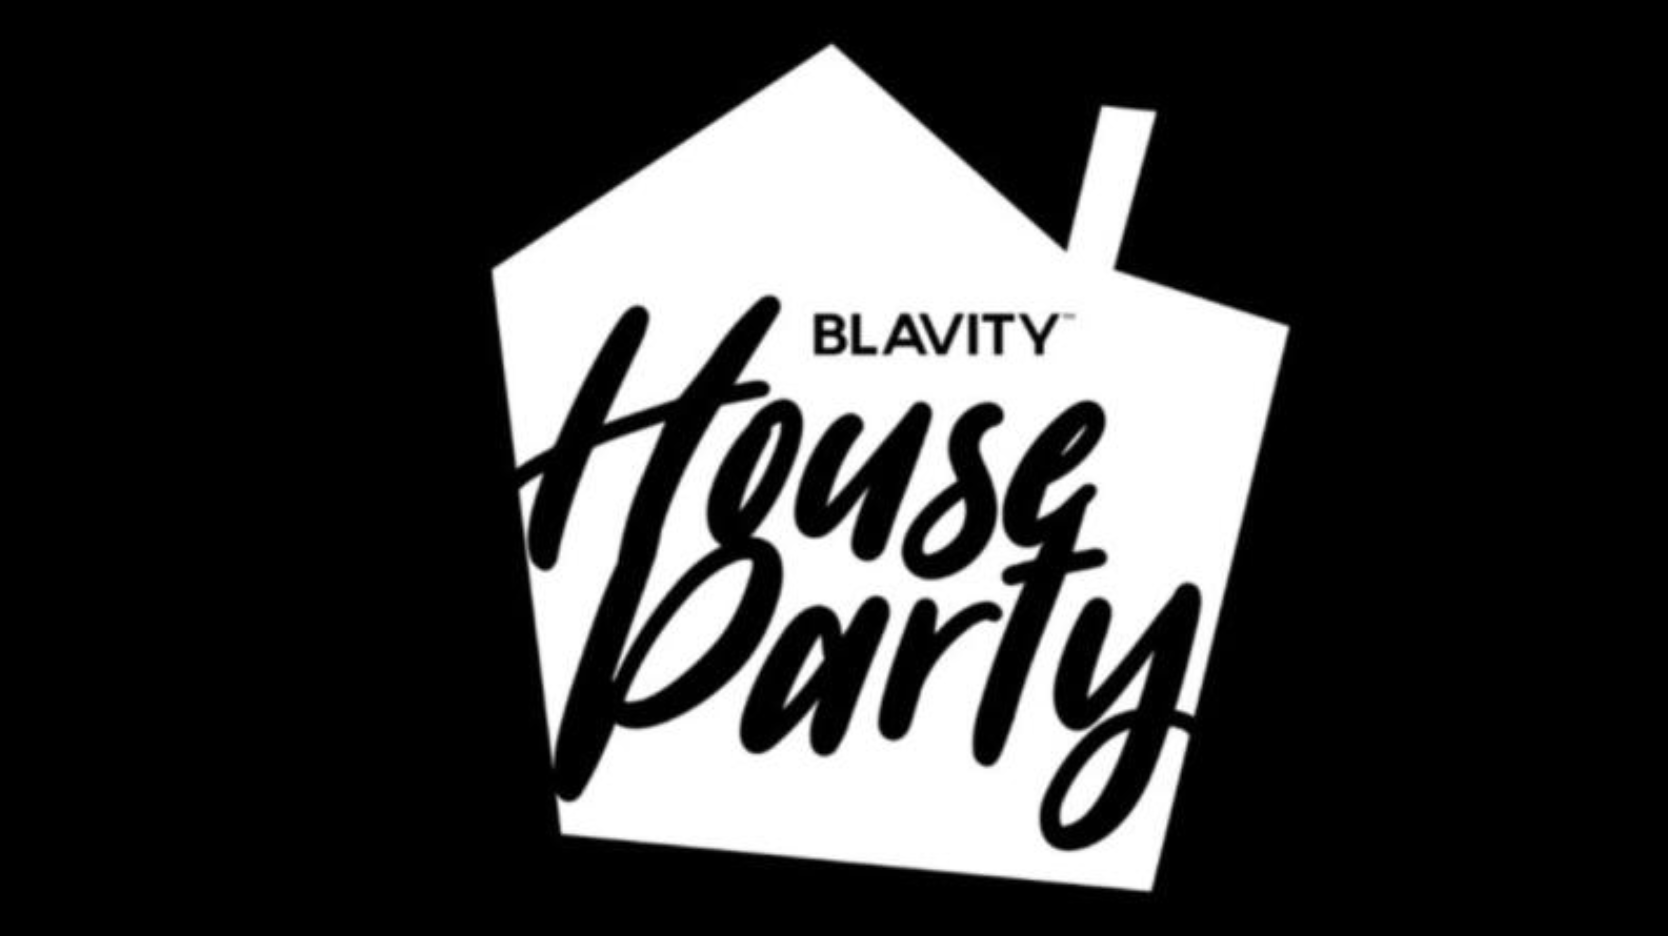 RNB House Party Is Now Blavity House Party After Acquisition #rnb